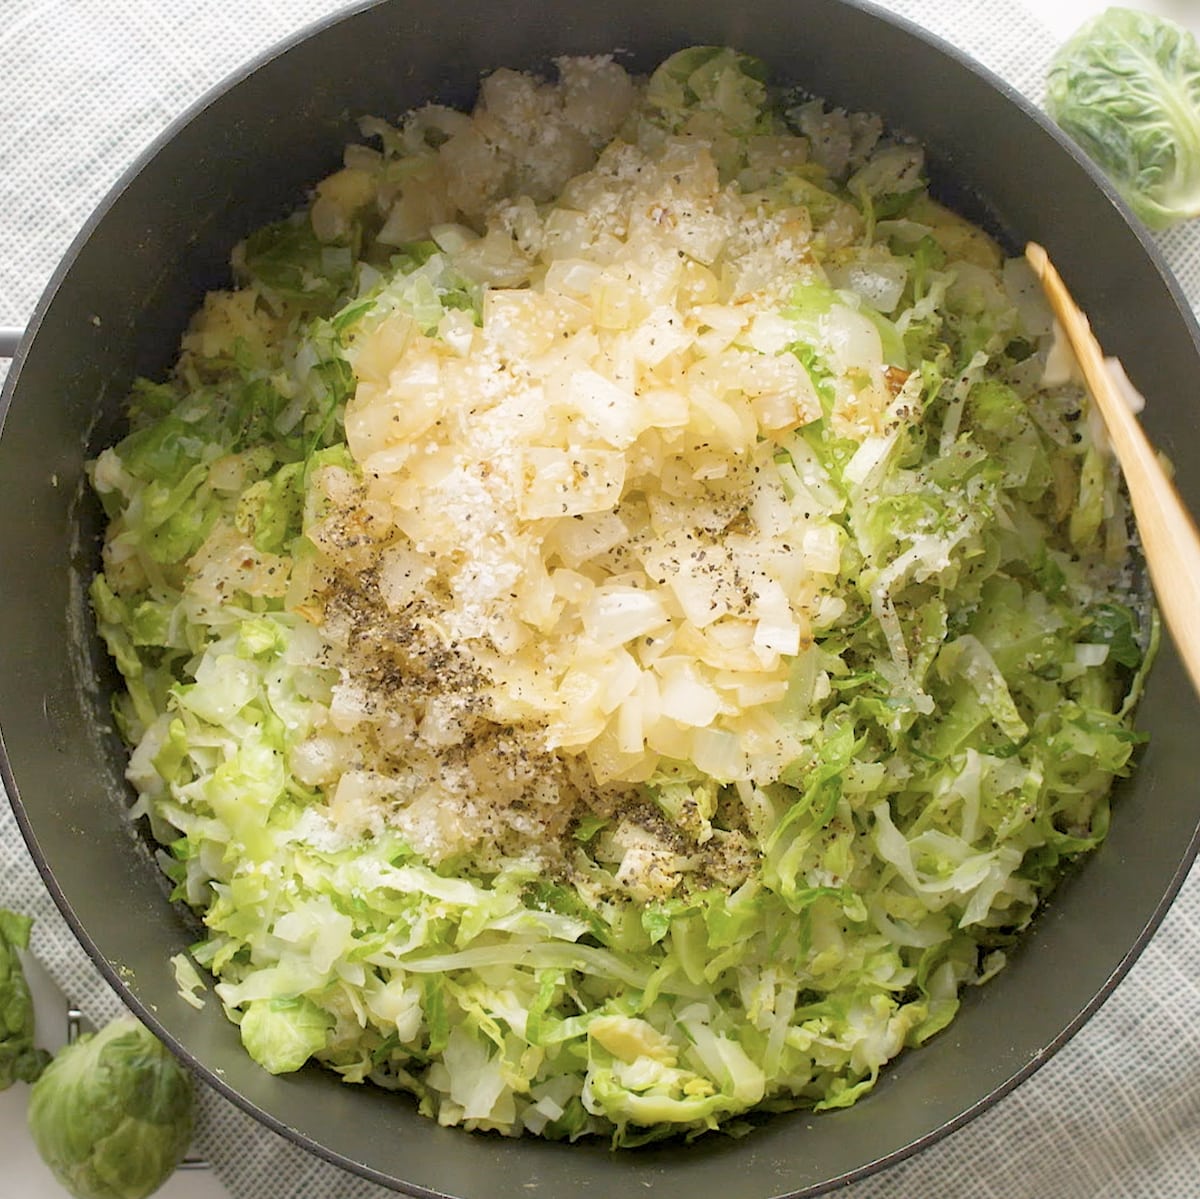 mashe dpotatoes, cabbage, sprouts and onion in a pan